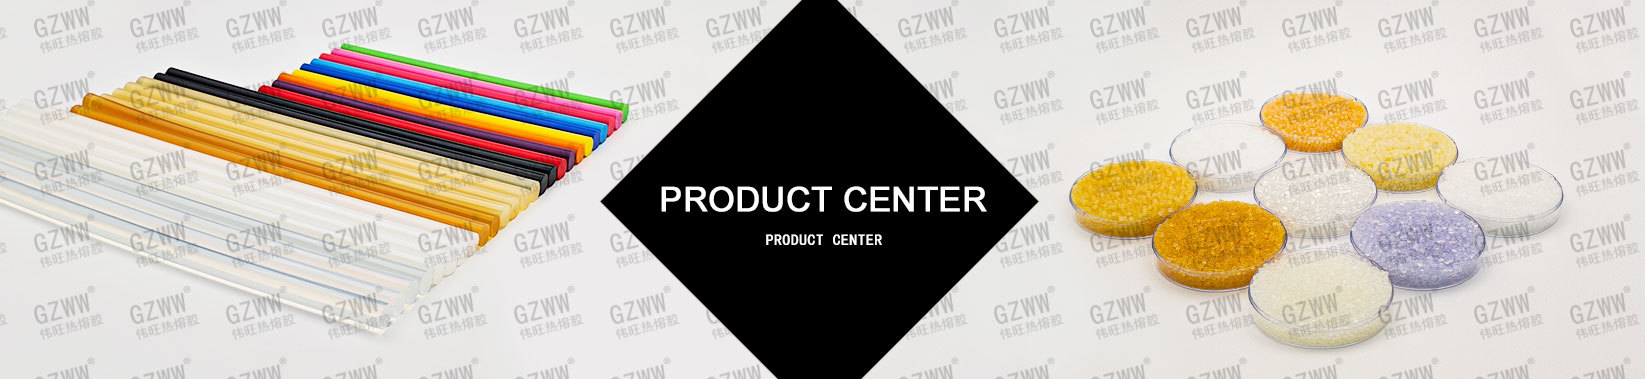 product center